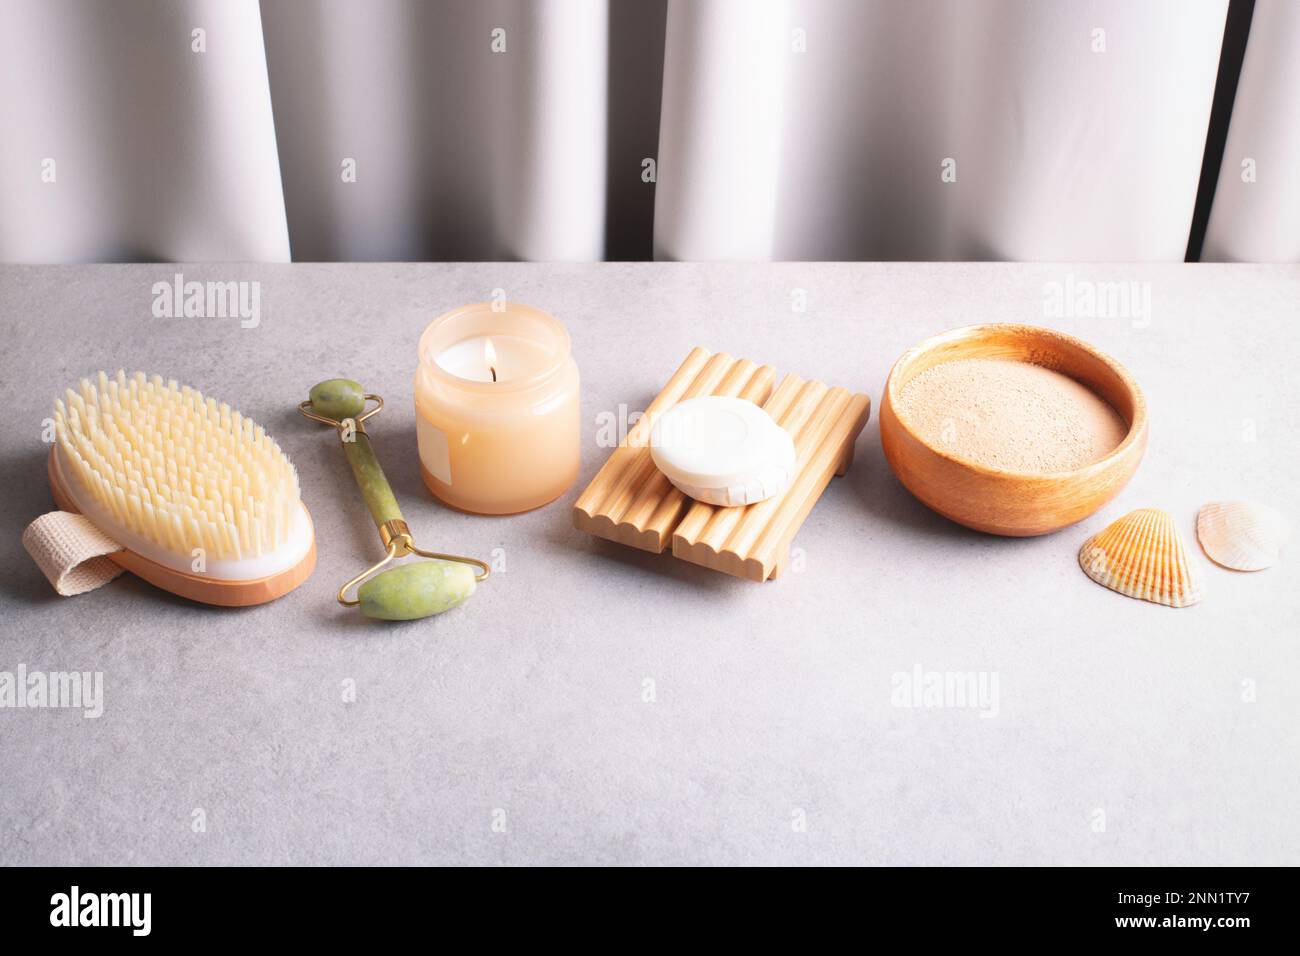 Beauty, self care, wellness, cosmetology products on gray stone table against gray curtains. Day spa, relaxation concept. Stock Photo